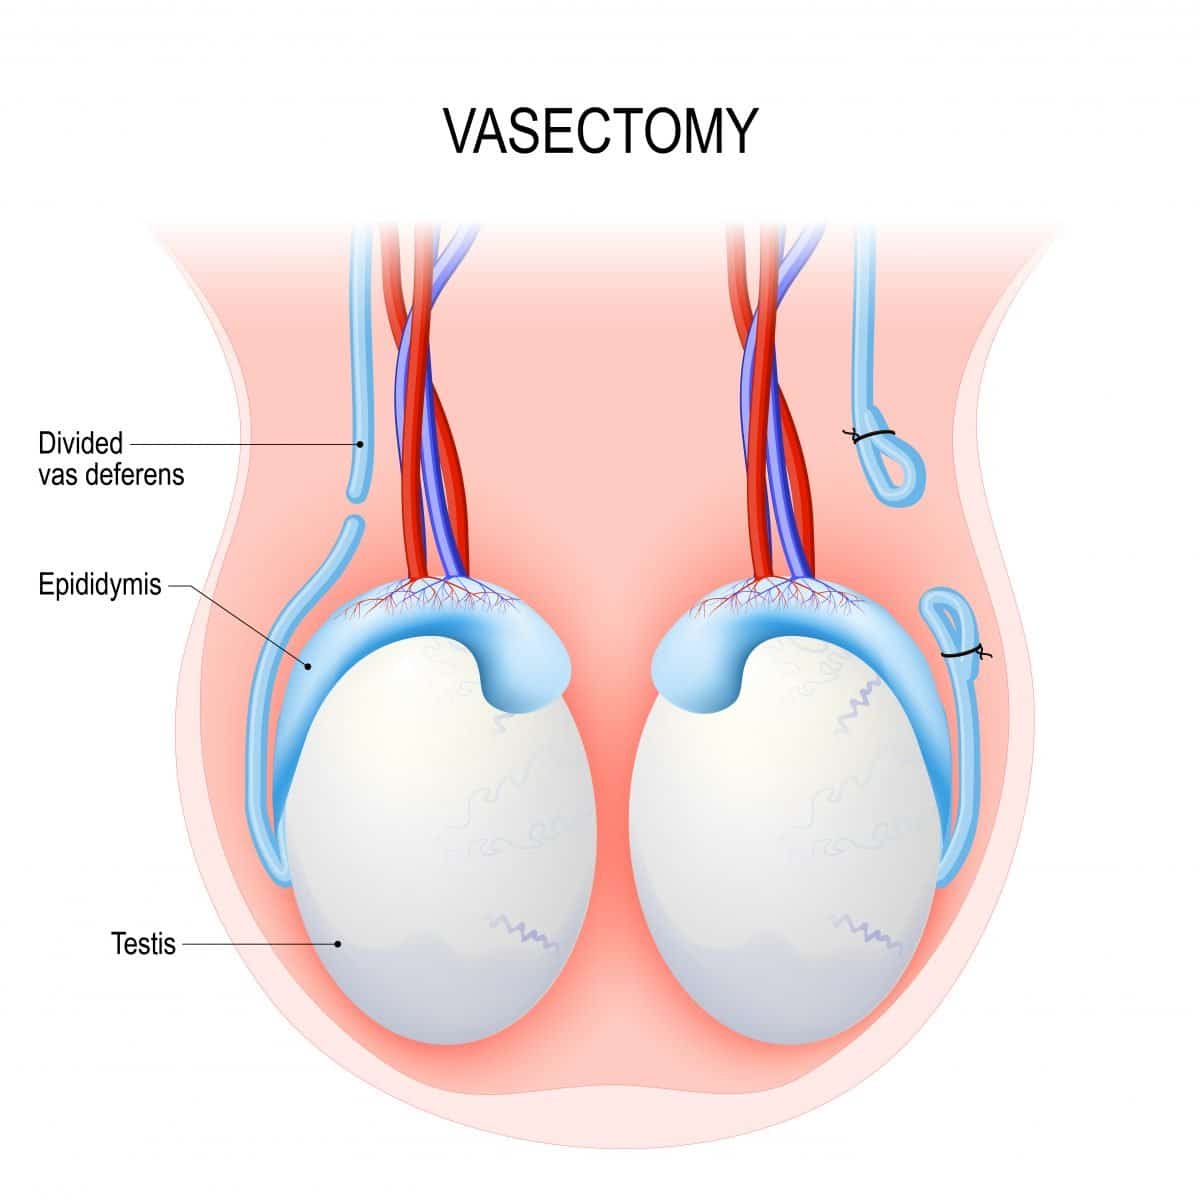 Prostate Cancer Risk Does Not Increase with Vasectomy, Study Reports